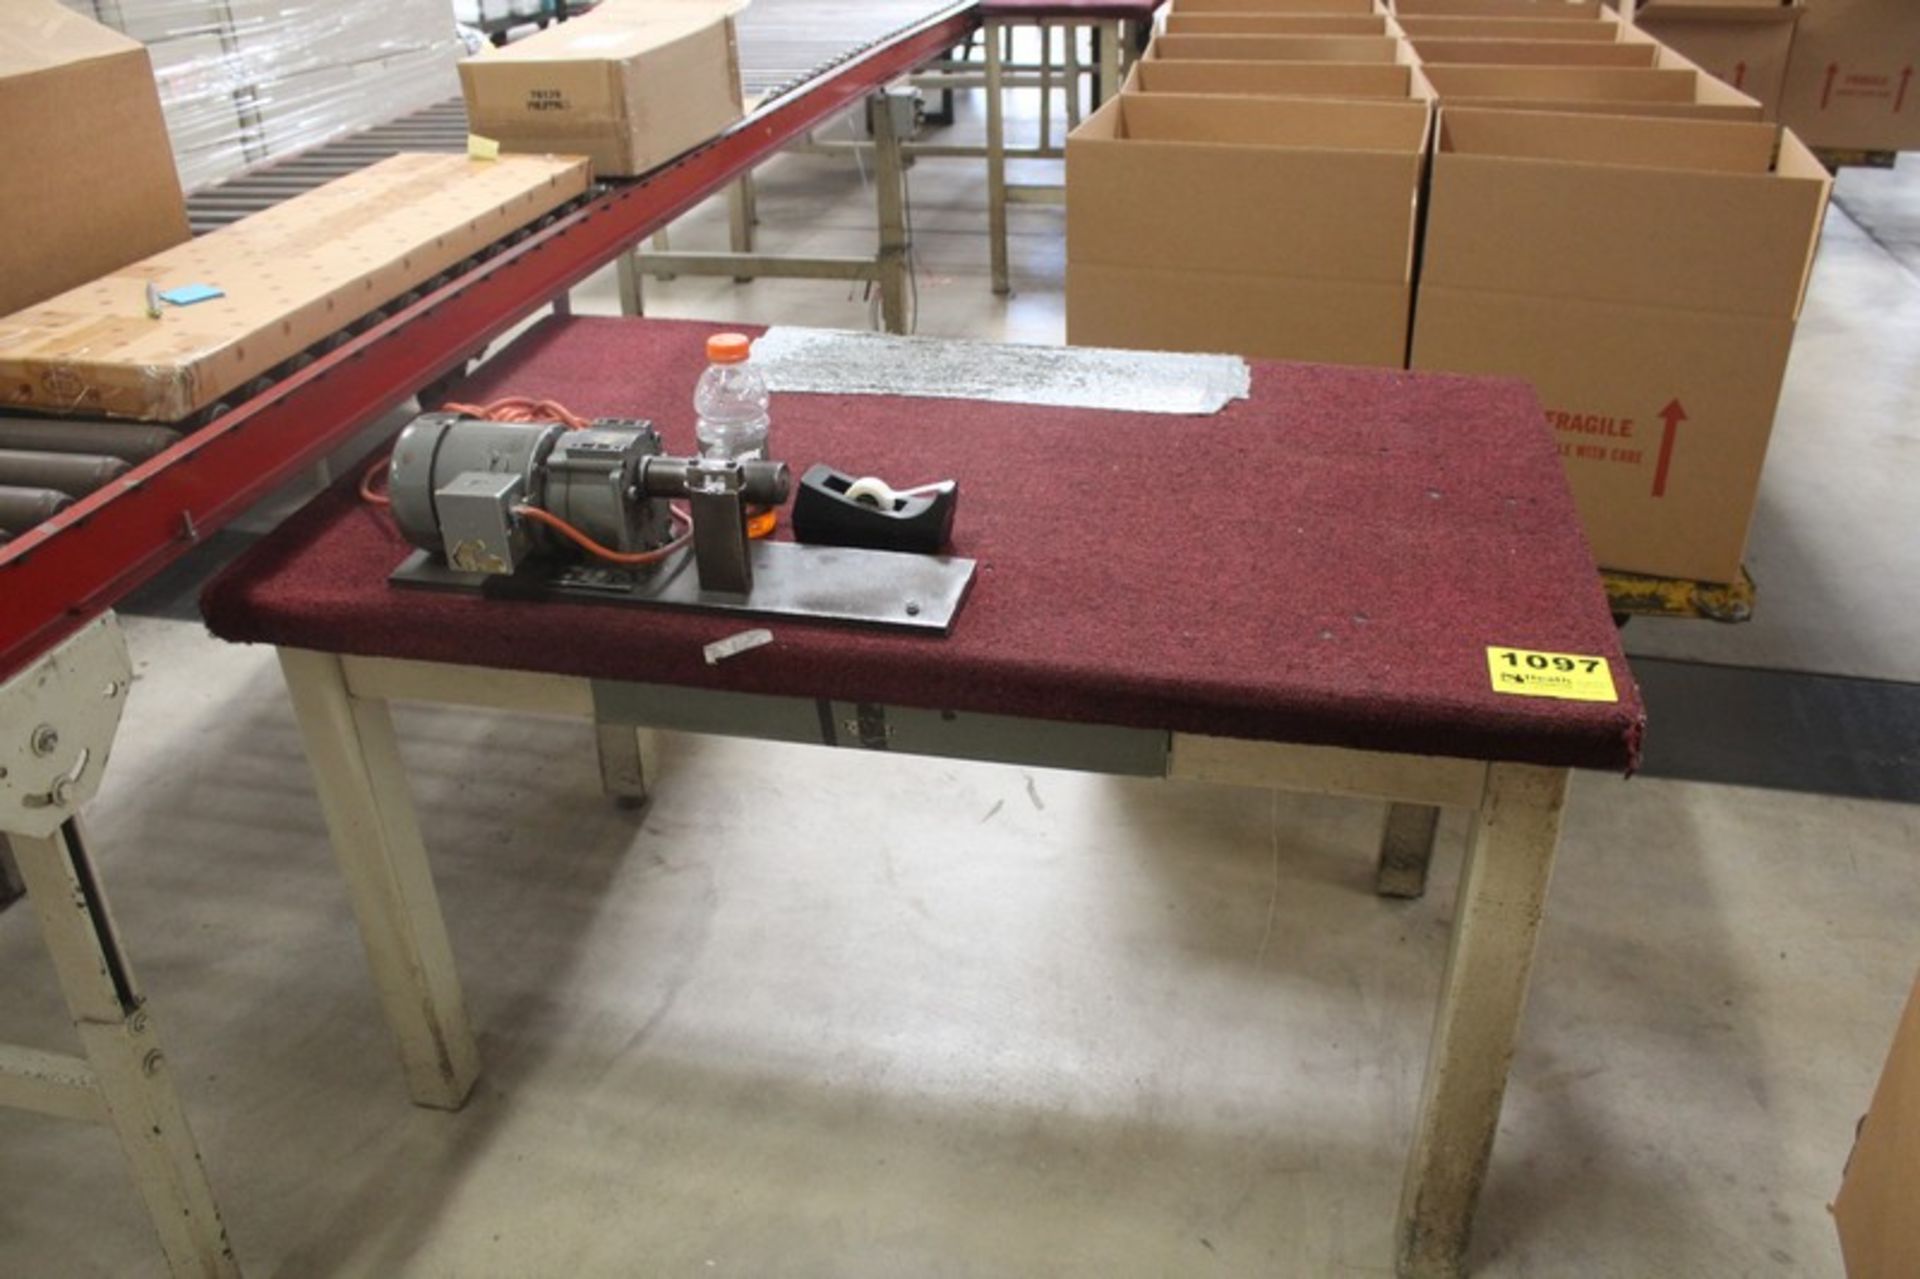 52" X 33" X 30" STEEL FRAME ASSEMBLY WORK BENCH, CARPETED TOP, MOUNTED ELECTRIC GEAR MOTOR